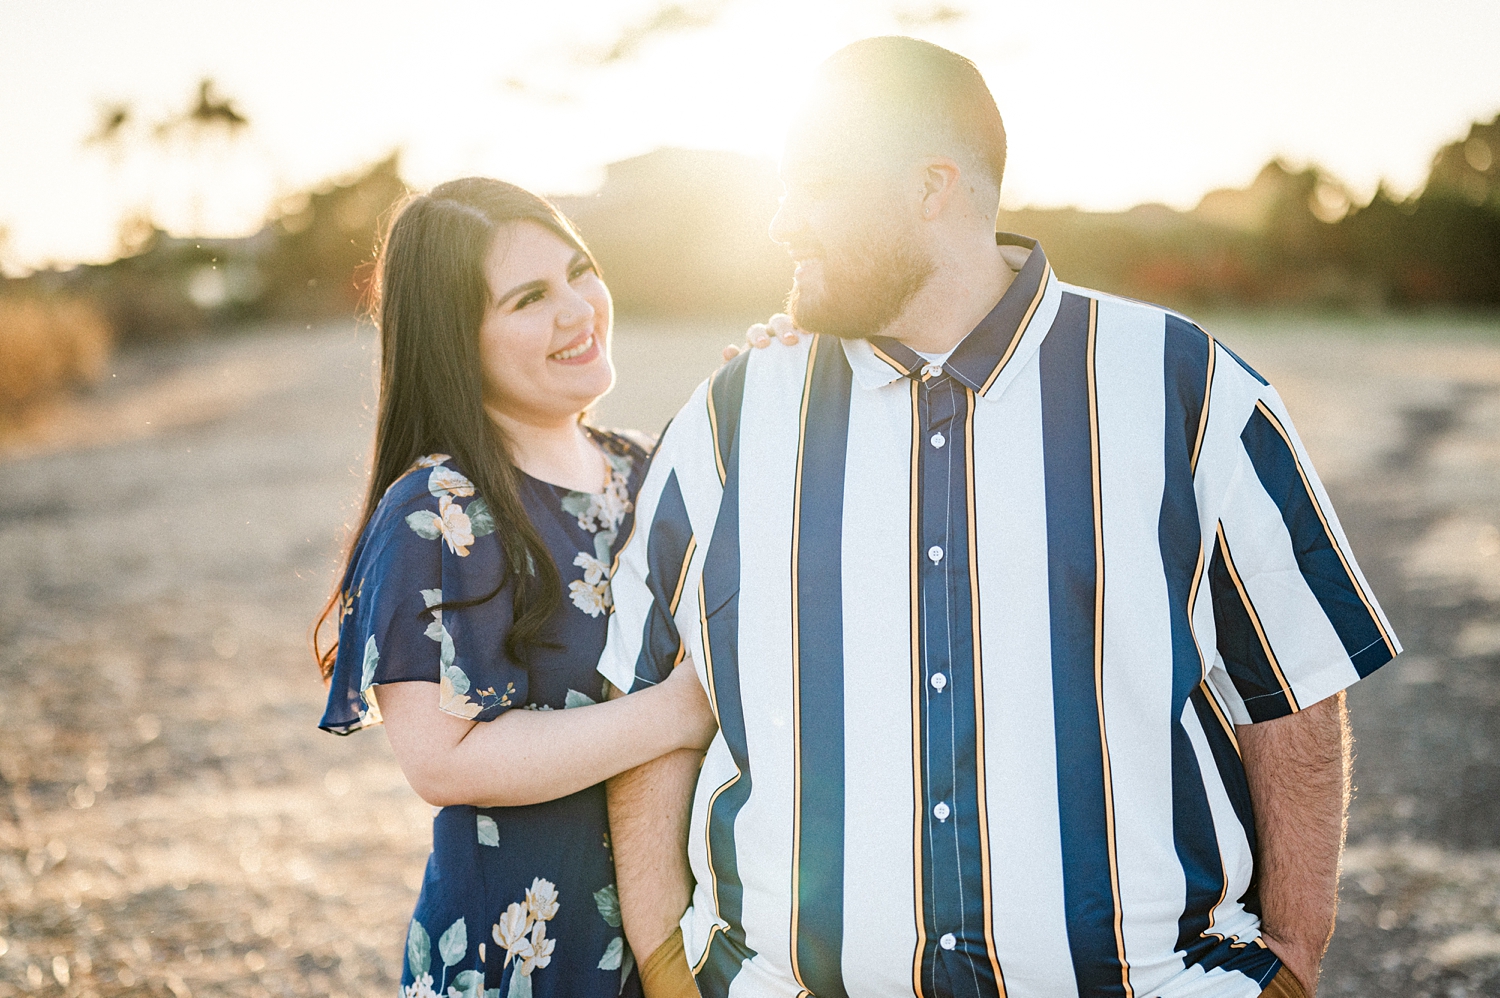 Beach Cliffs Engagement Session at Sunset | Nataly Hernandez Photography | Edwin and Susana-64.jpg